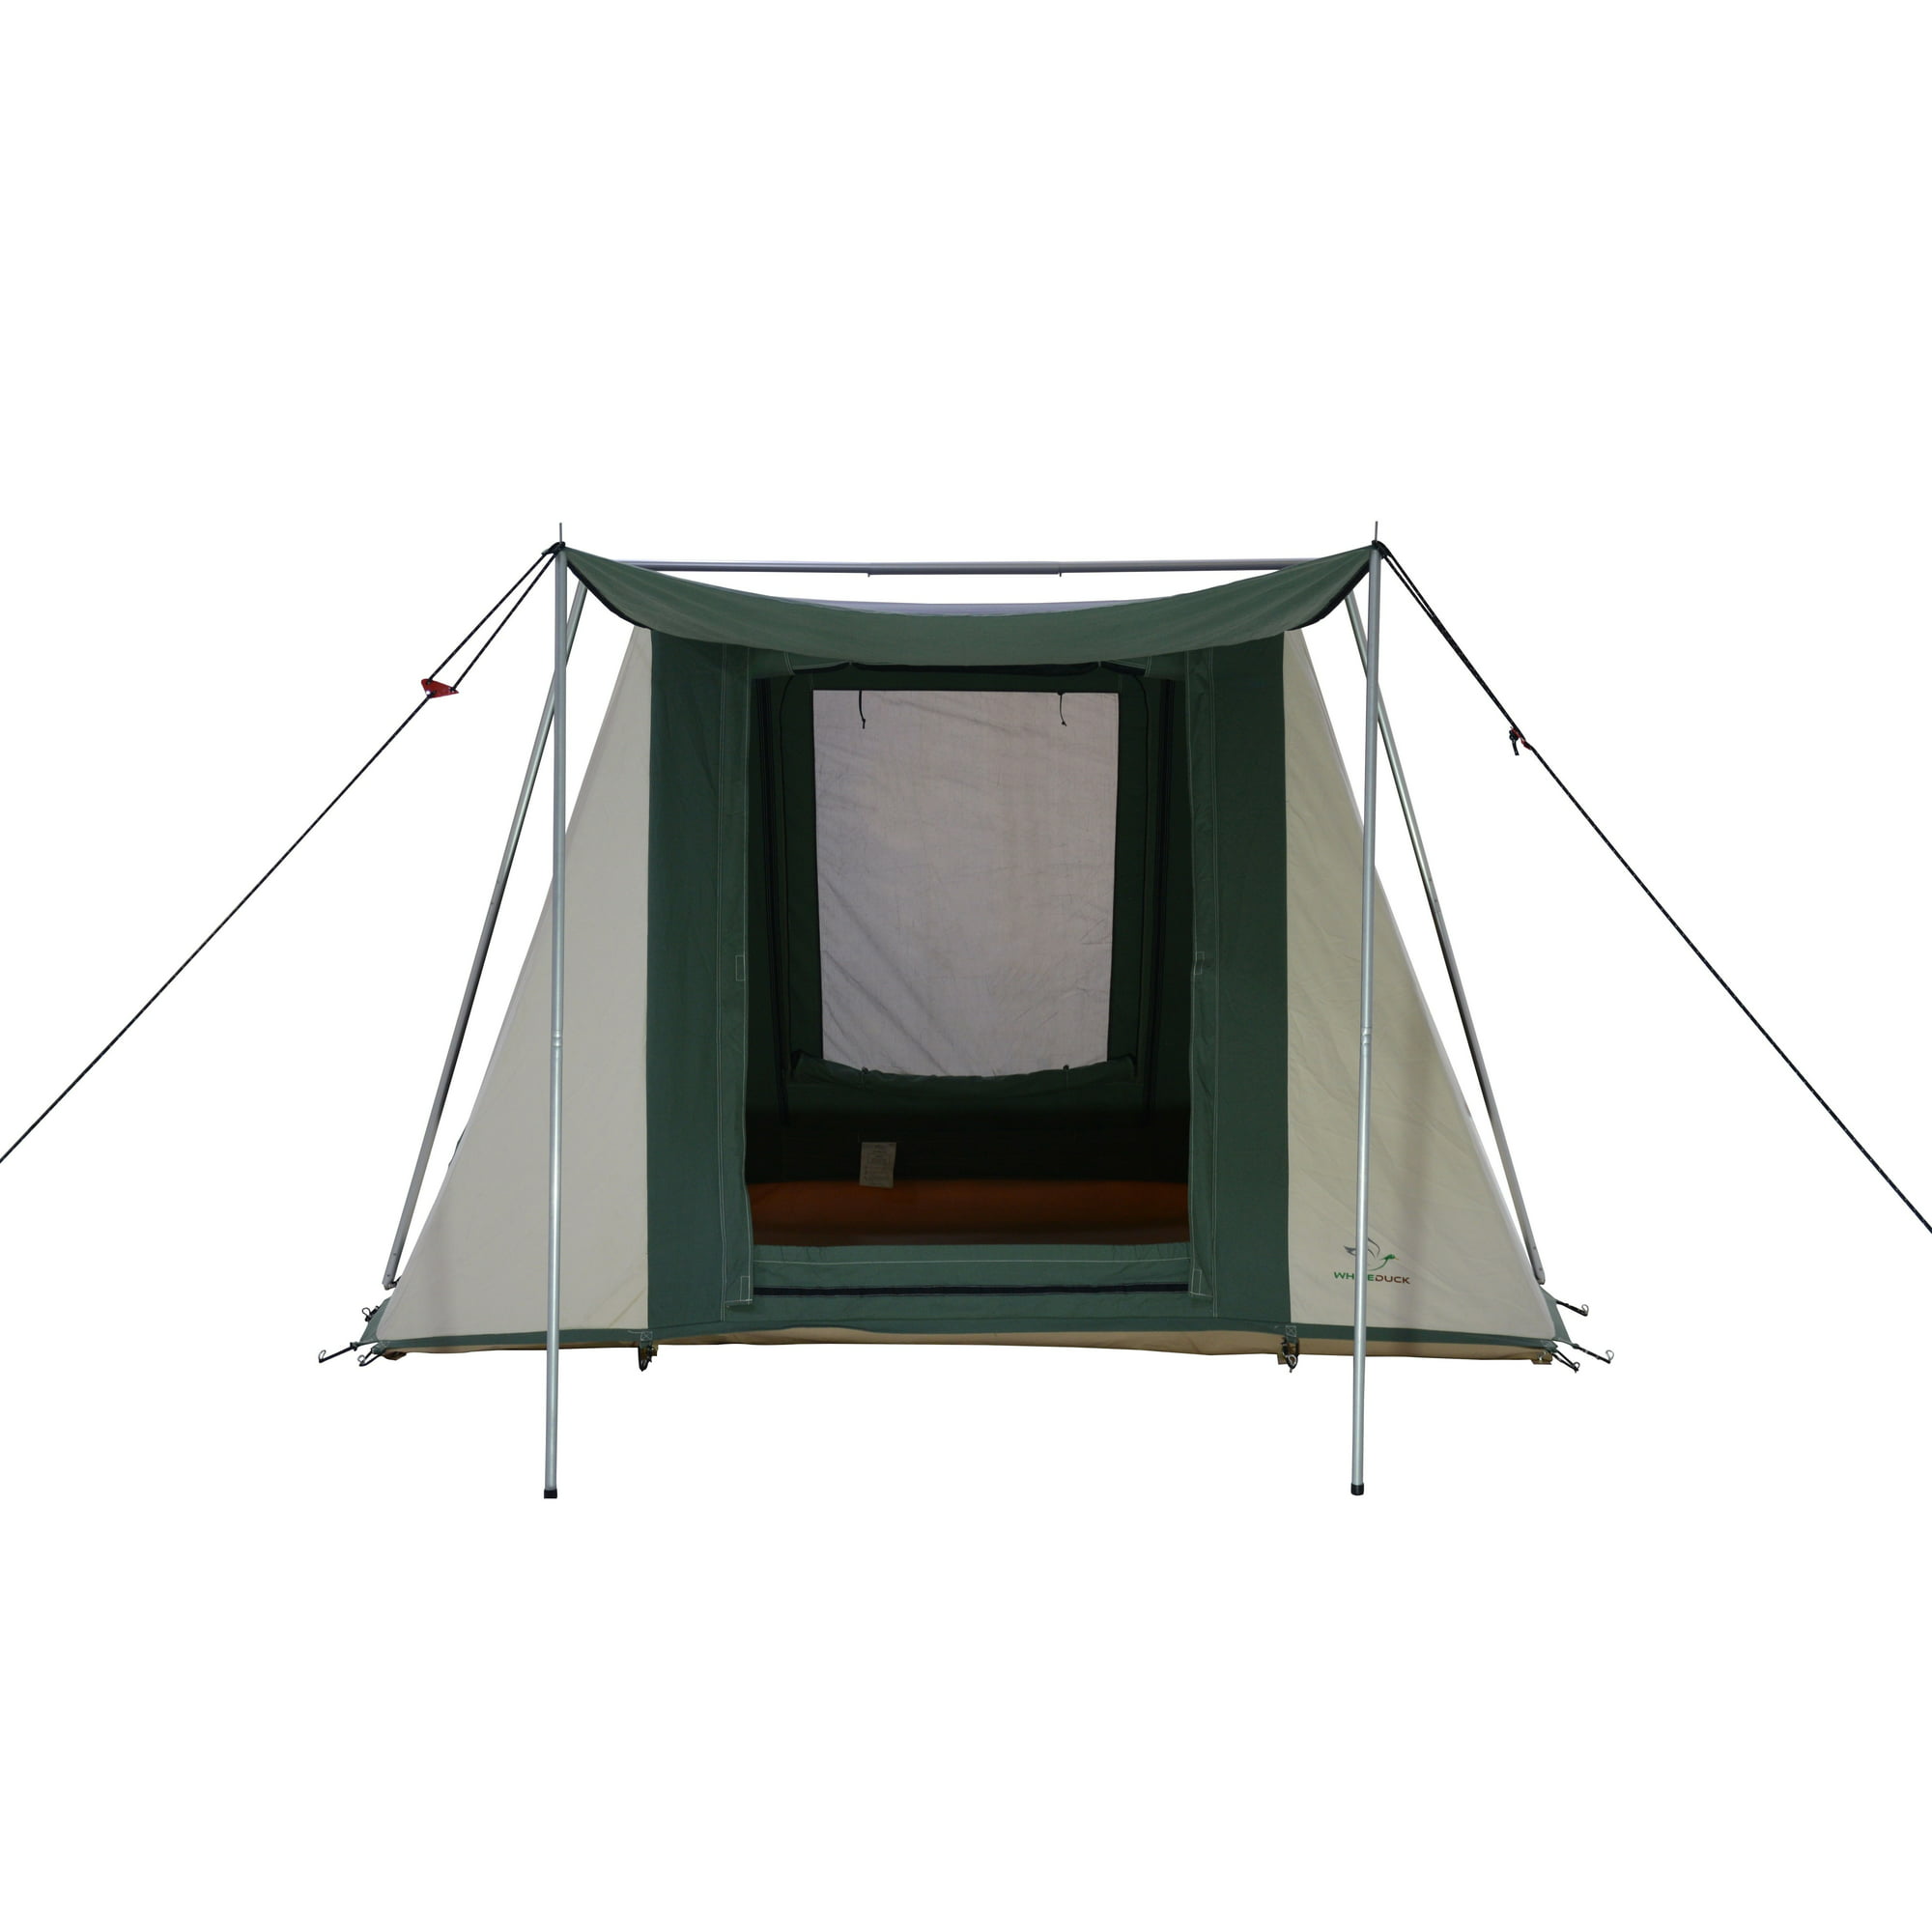 Cabin Style for 4 Person tent